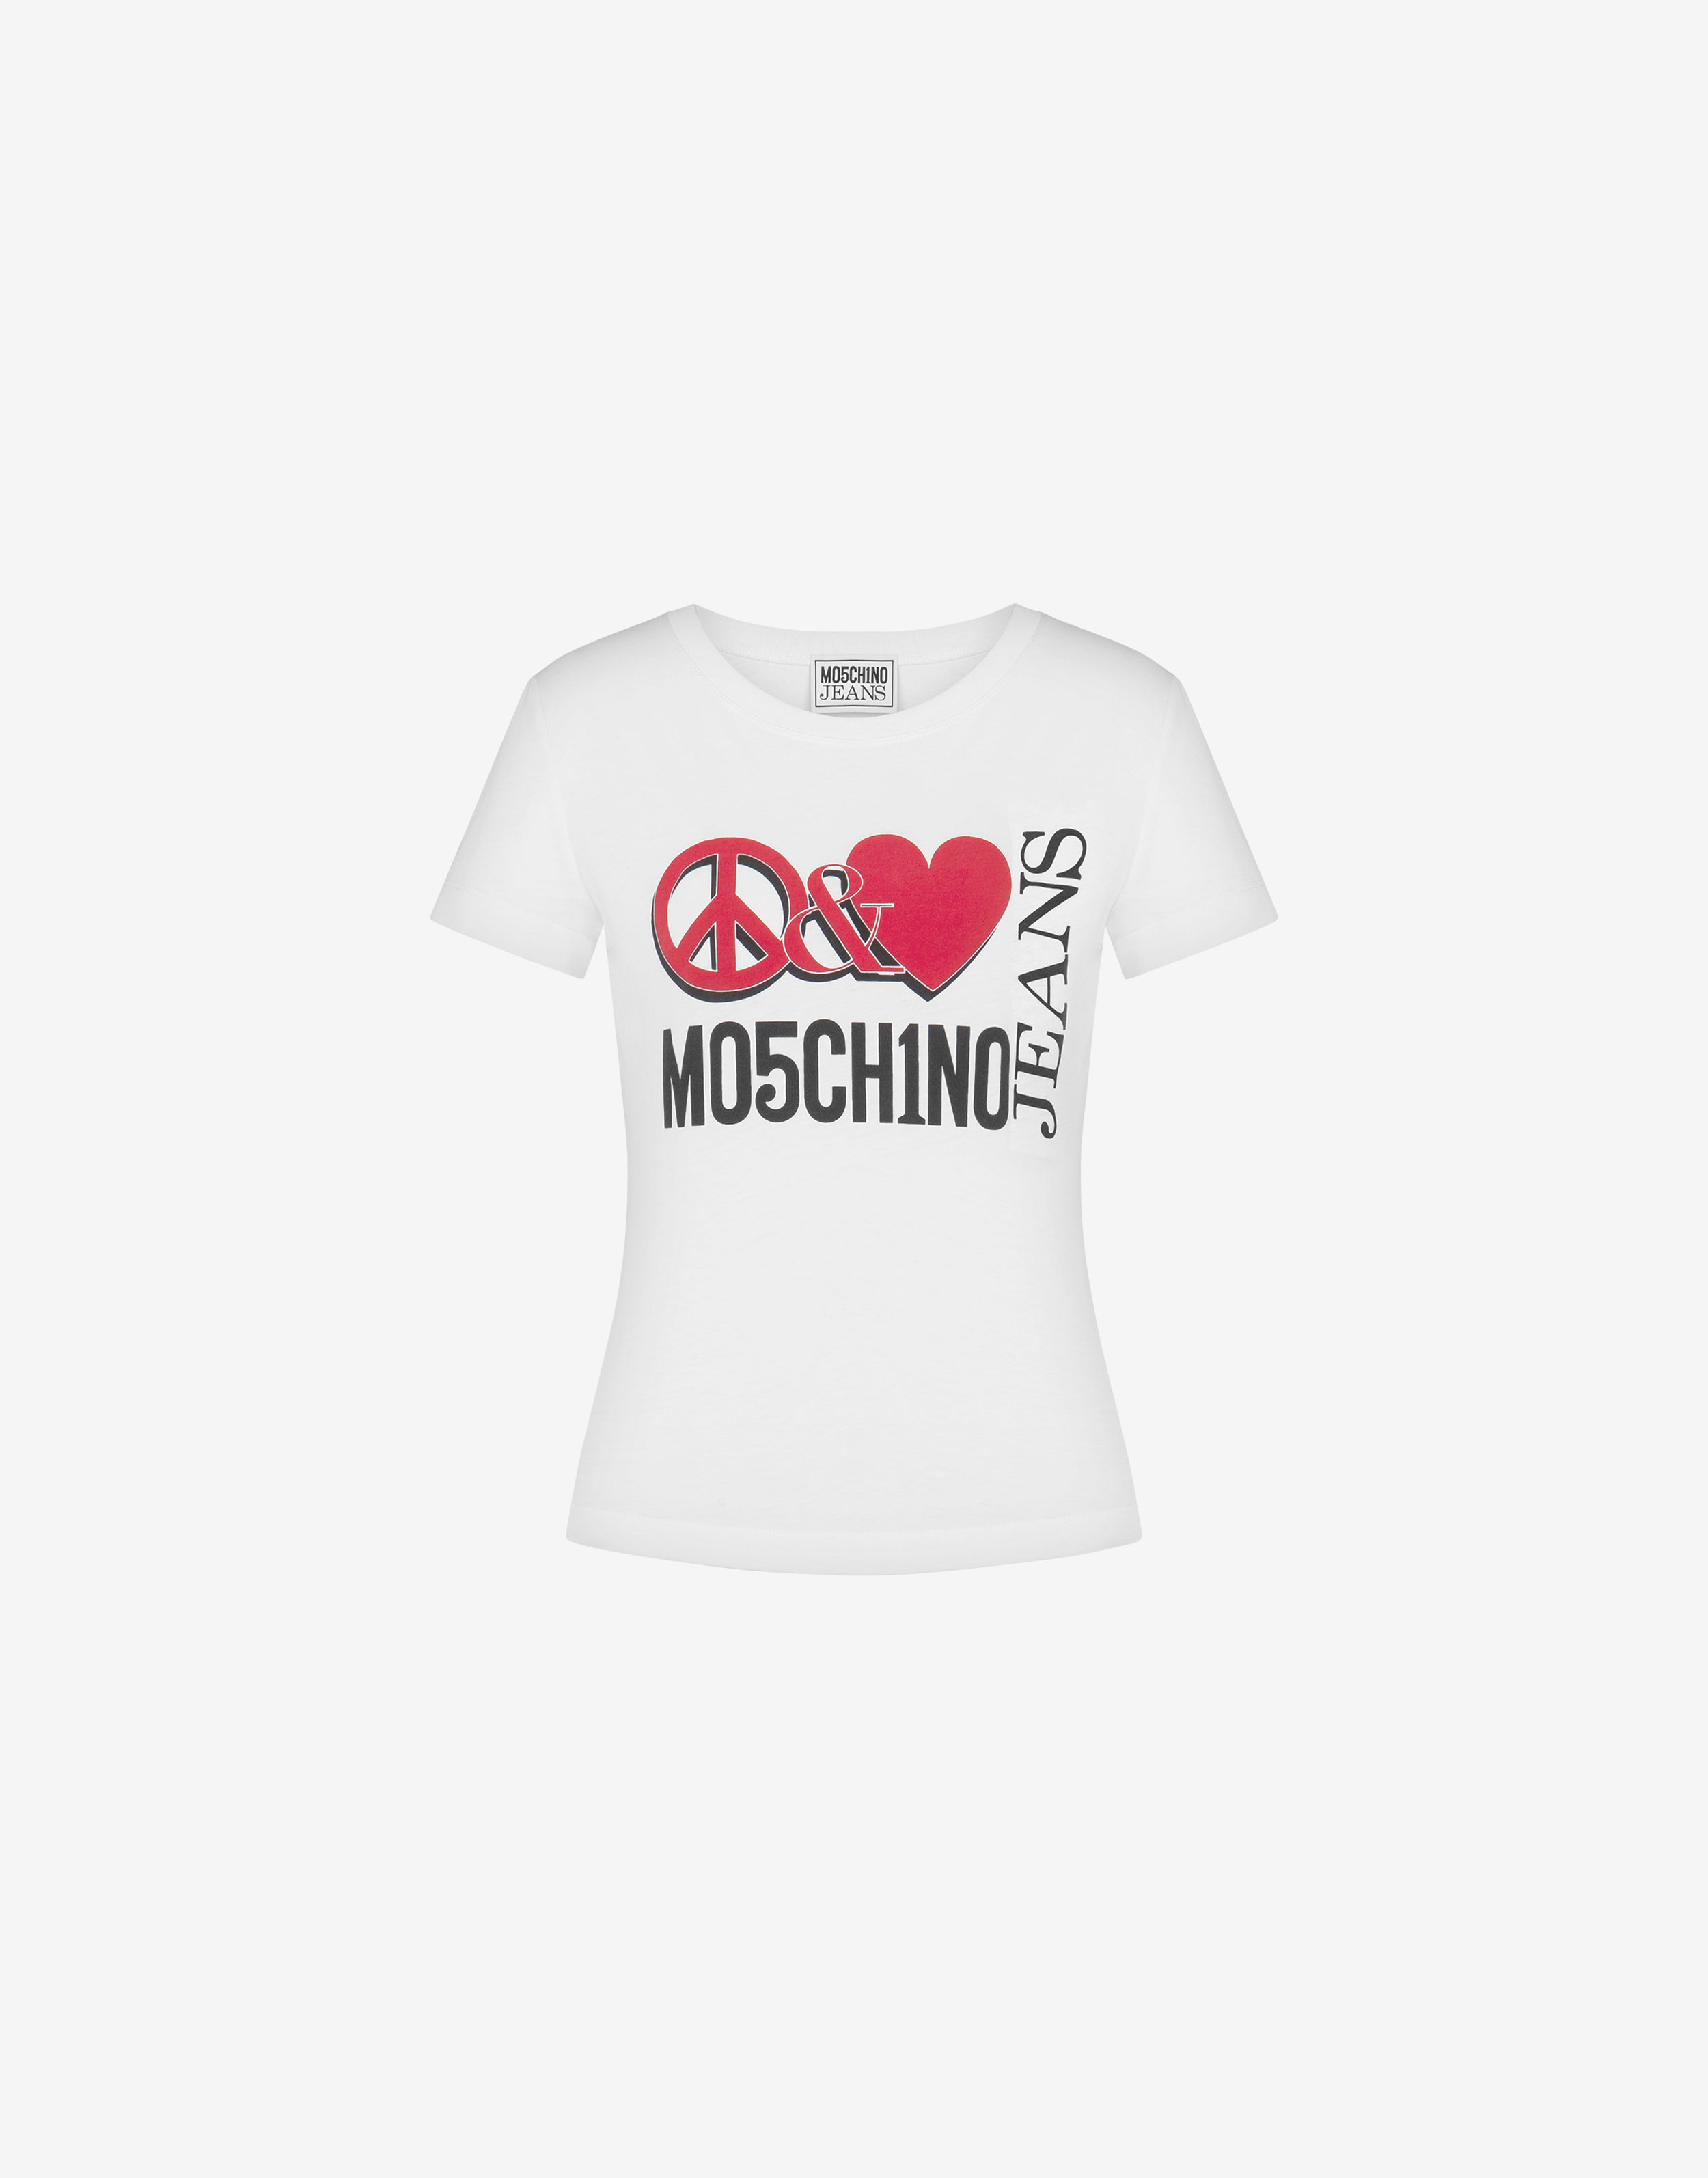 Peace & Love ジャージー Tシャツ | Moschino Official Store